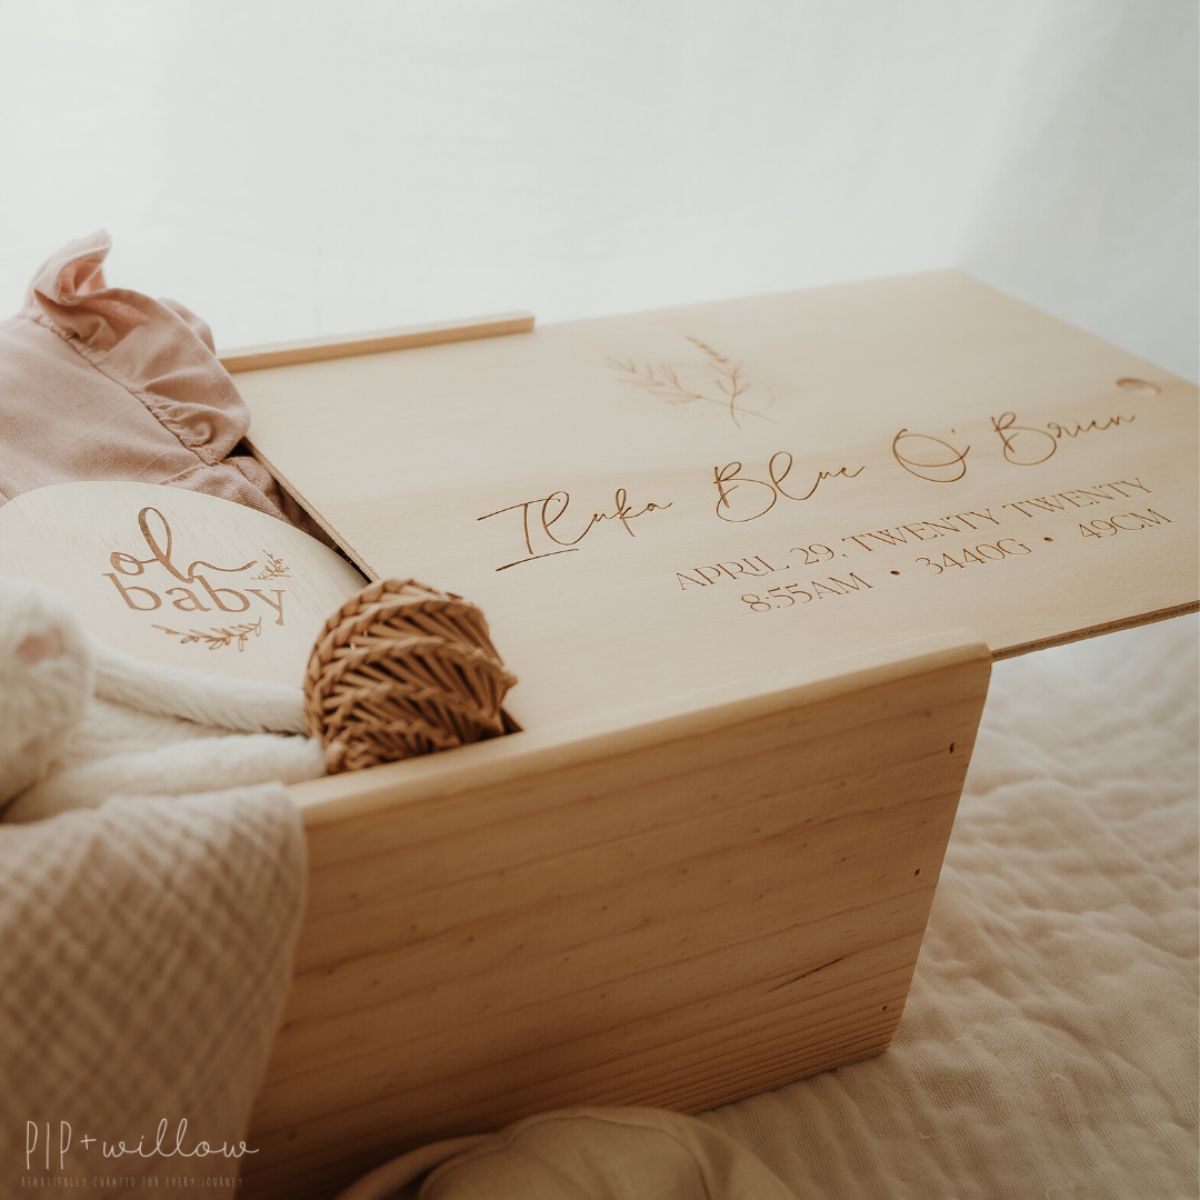 This is a large wooden baby keepsake box with a floral design shot at an angle